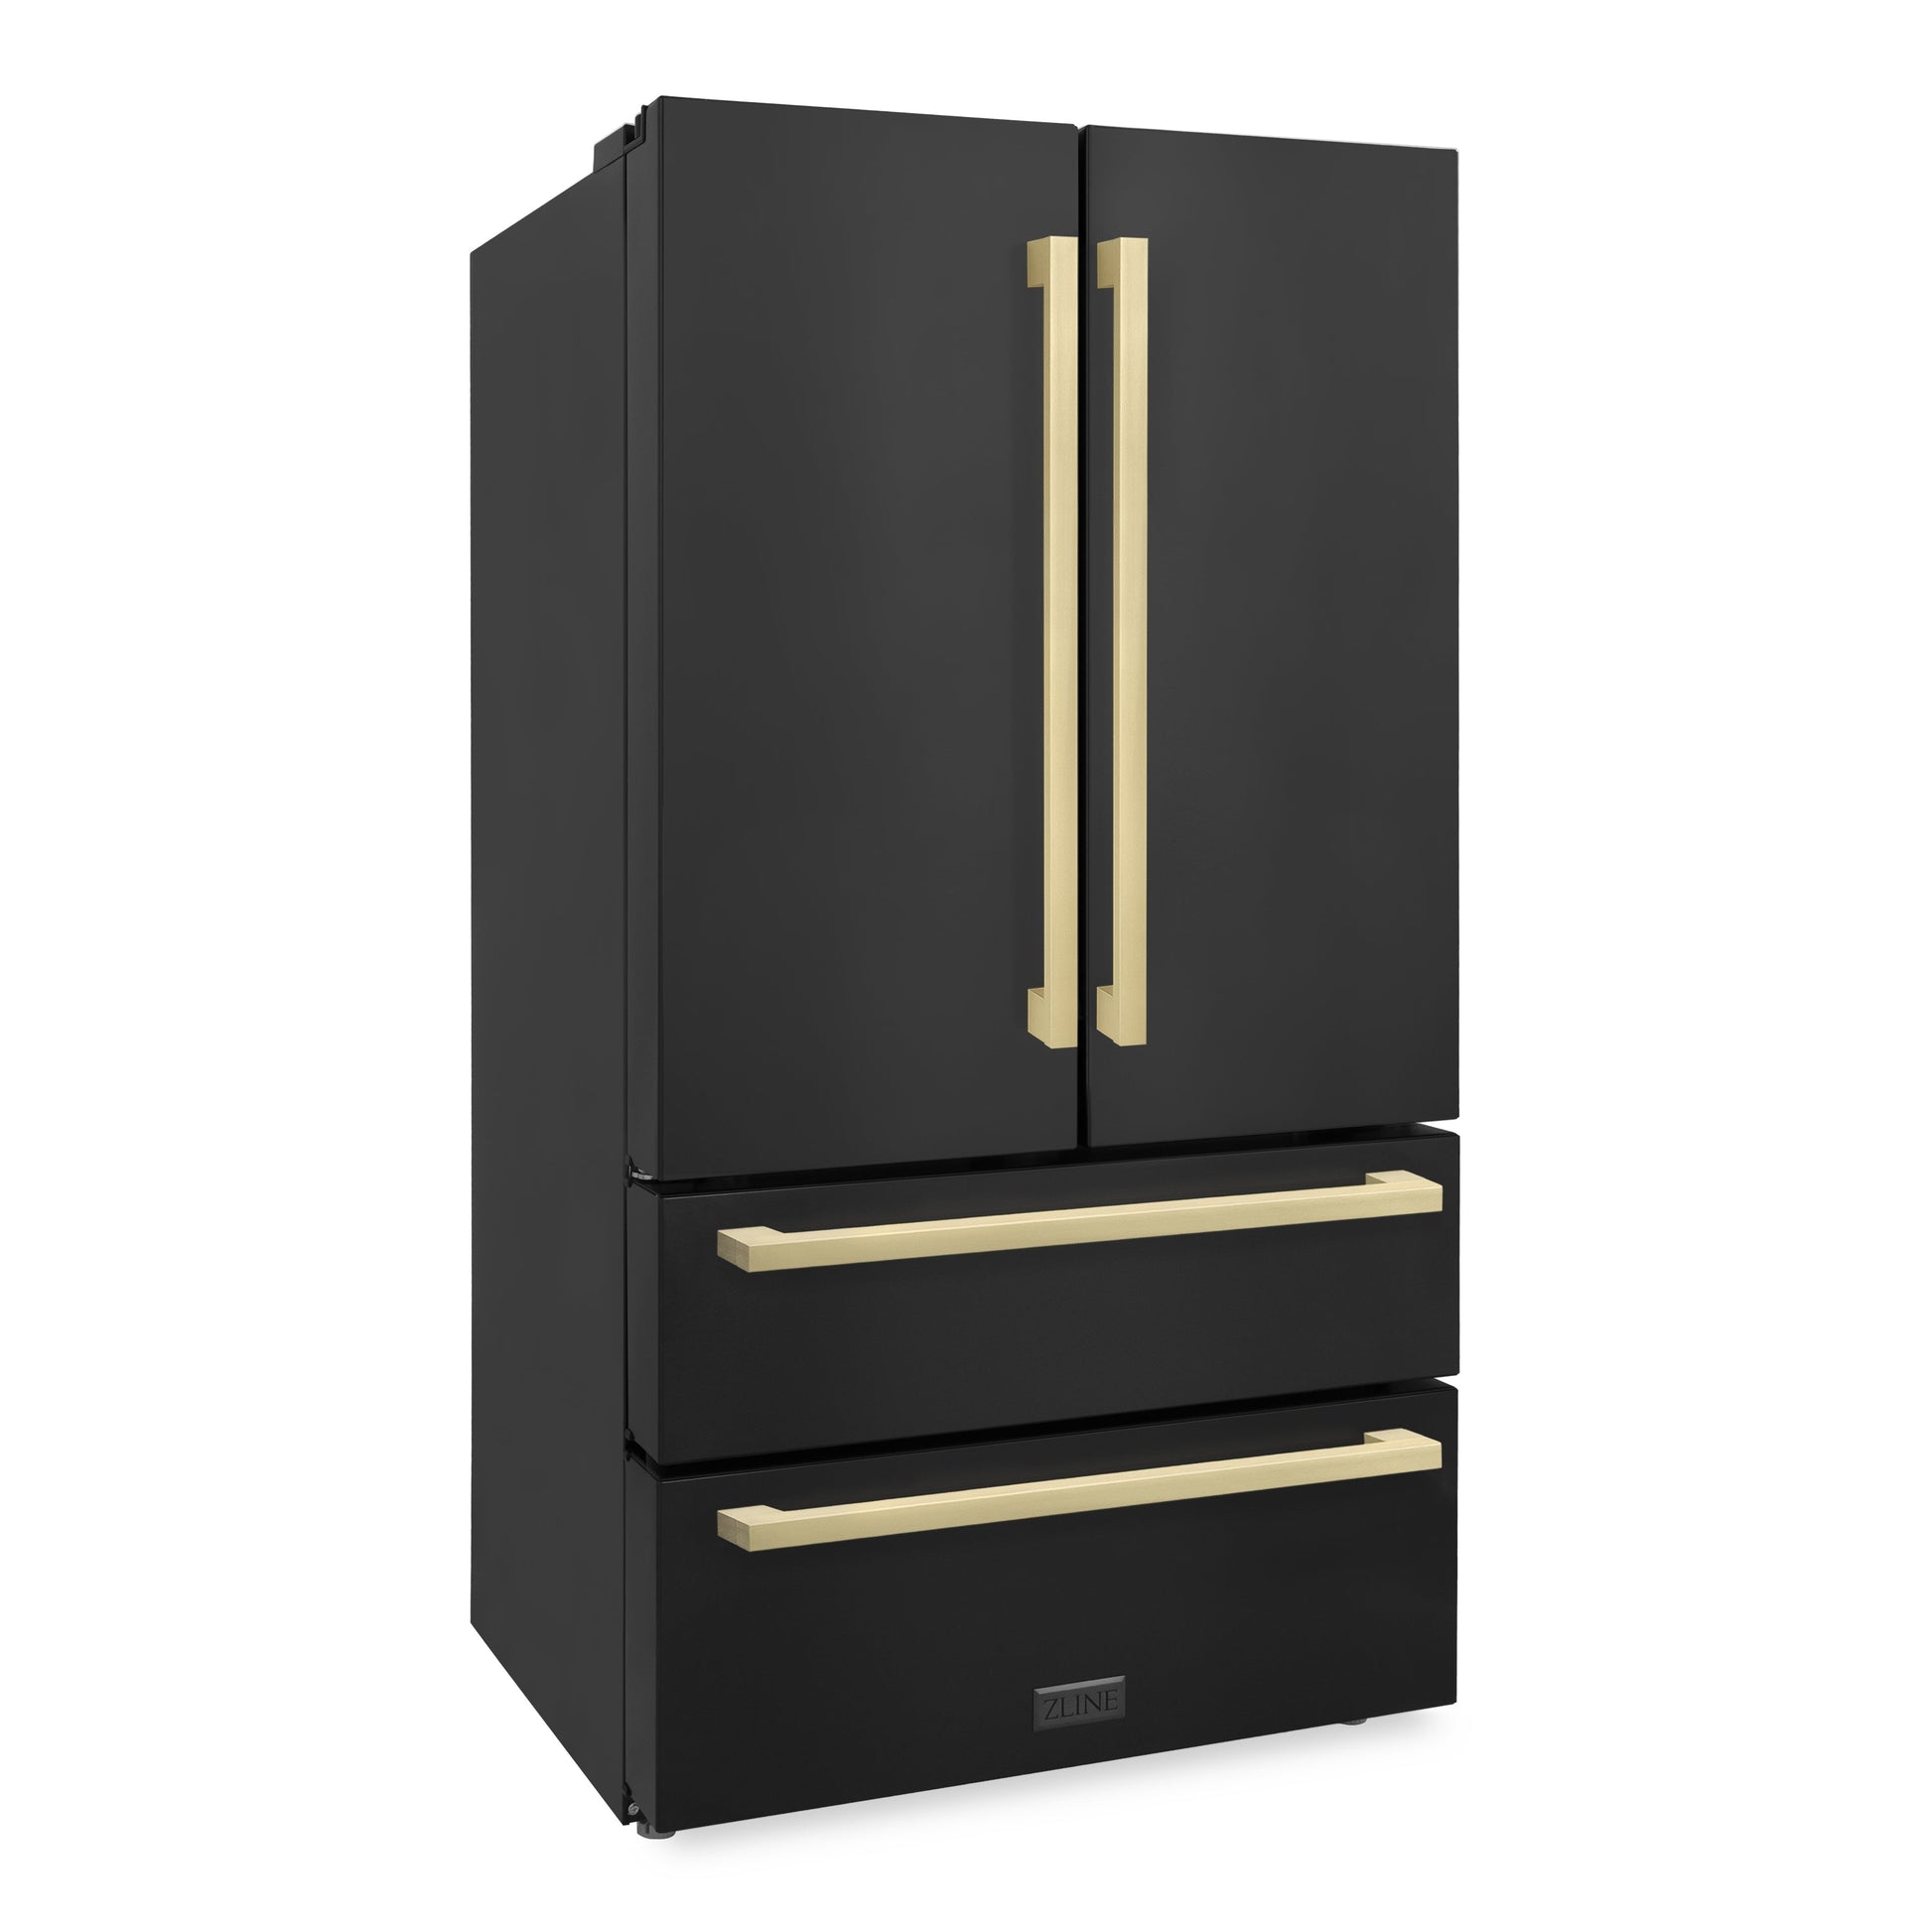 ZLINE 36" Autograph Edition 4-Door French Door Refrigerator with Ice Maker - Black Stainless Steel with Champagne Bronze Square Handles